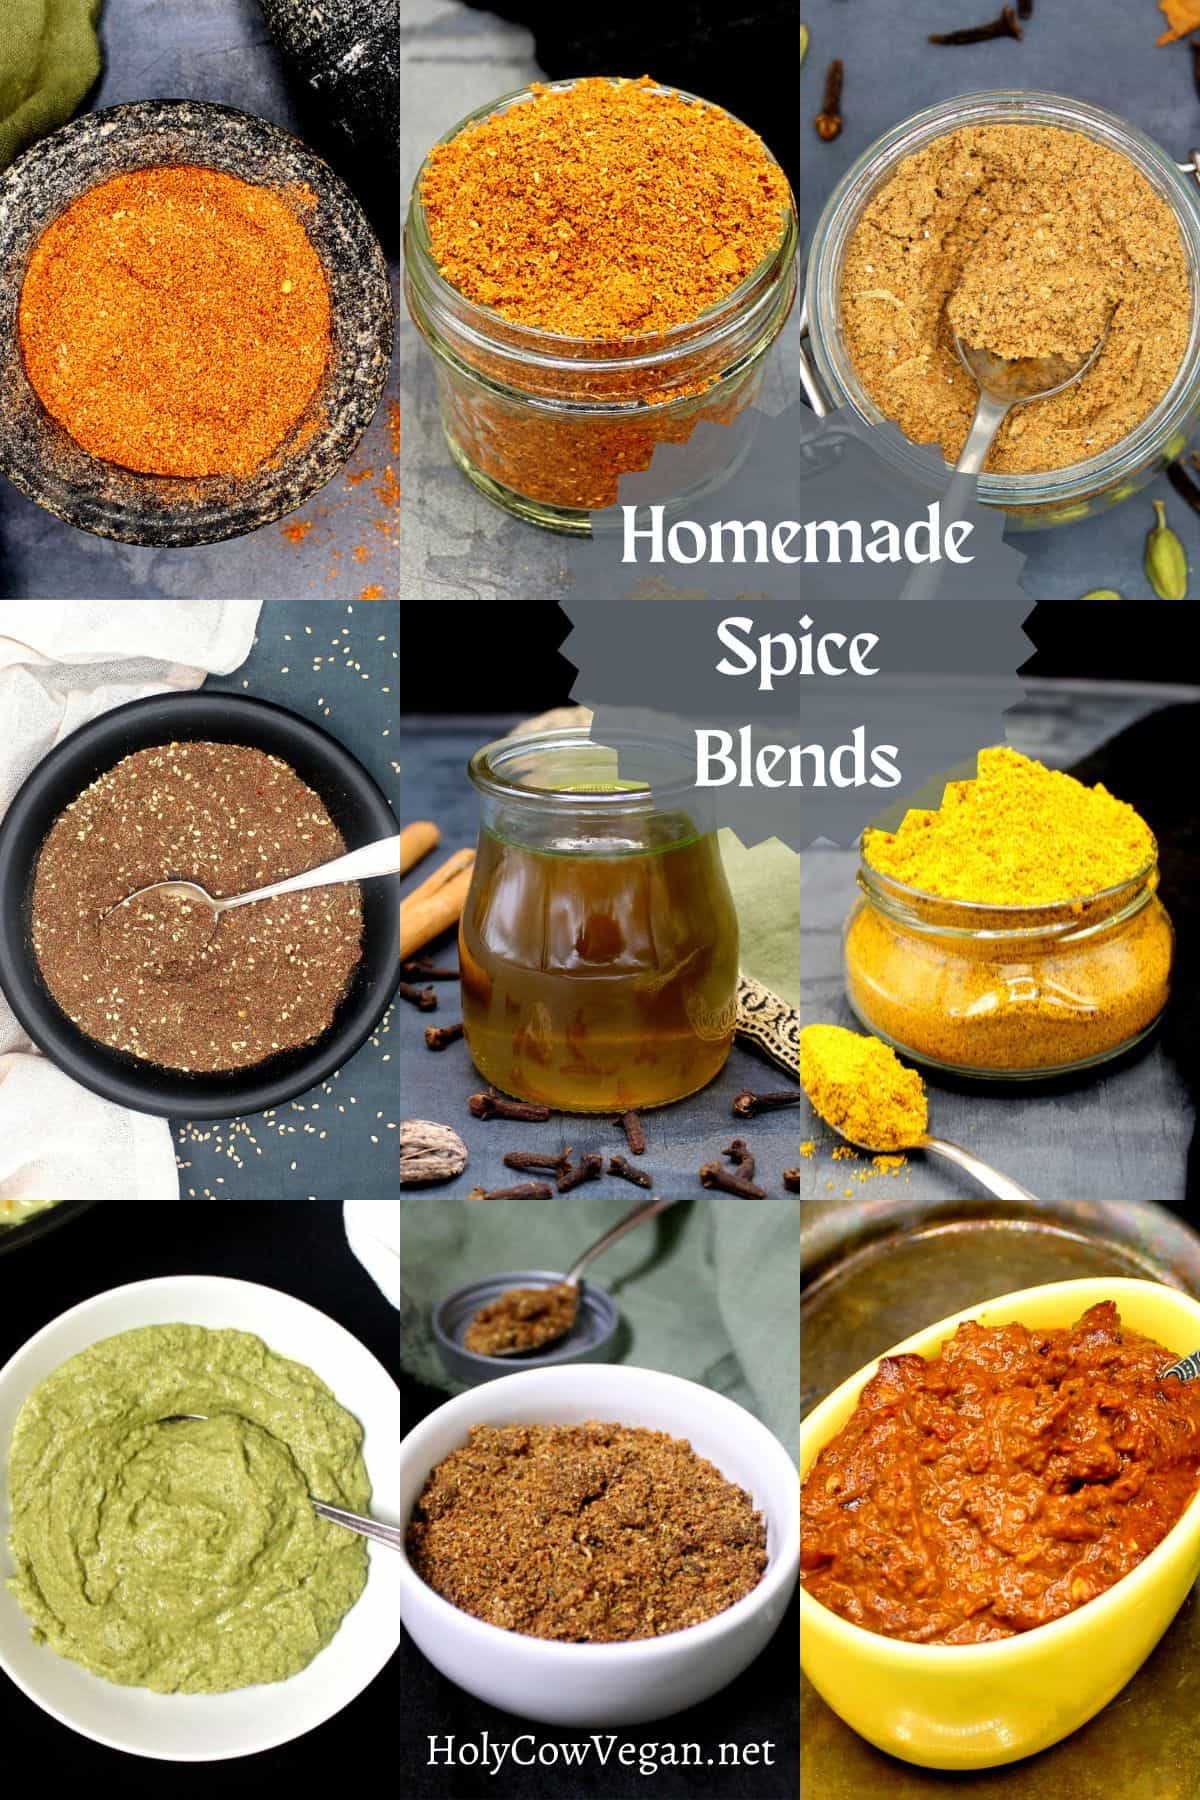 Image of nine spice blends in a grid with text that says "homemade spice blends".